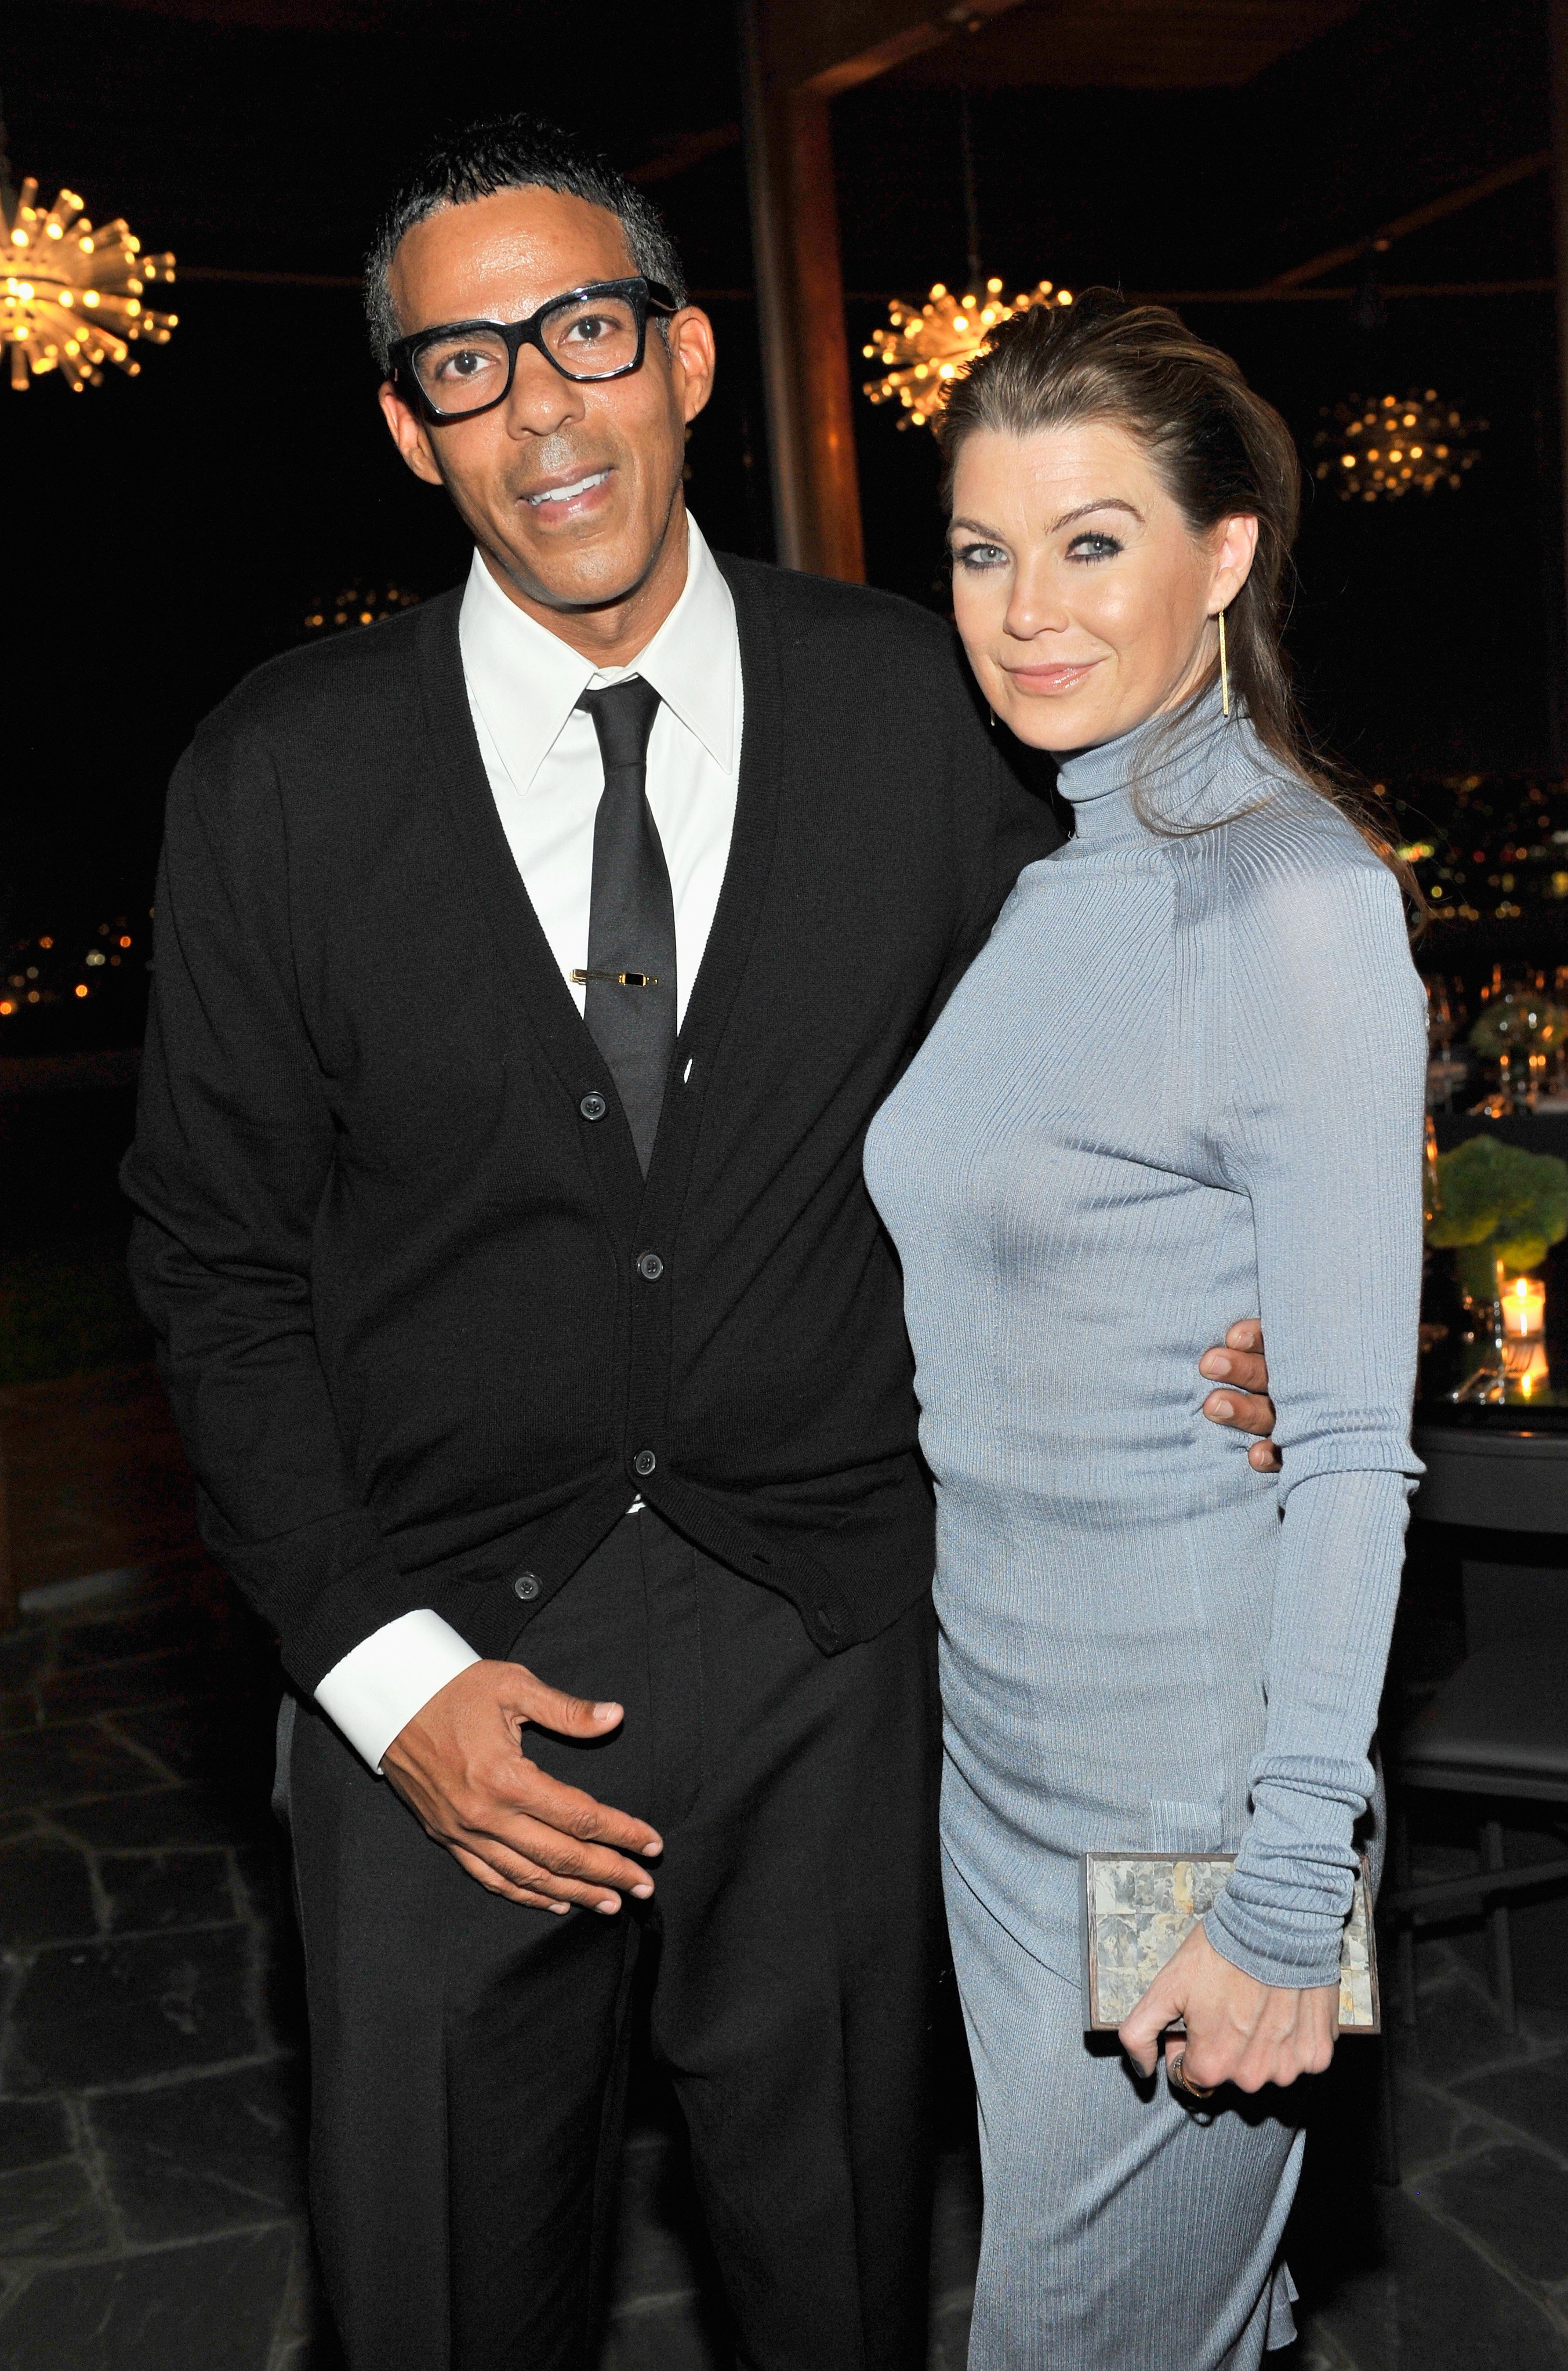 Music producer Chris Ivery (L) and actress Ellen Pompeo attend a private dinner hosted by VOGUE to celebrate TOD'S Creative Director Alessandra Facchinetti on November 5, 2014, in Los Angeles, California. | Source: Getty Images.